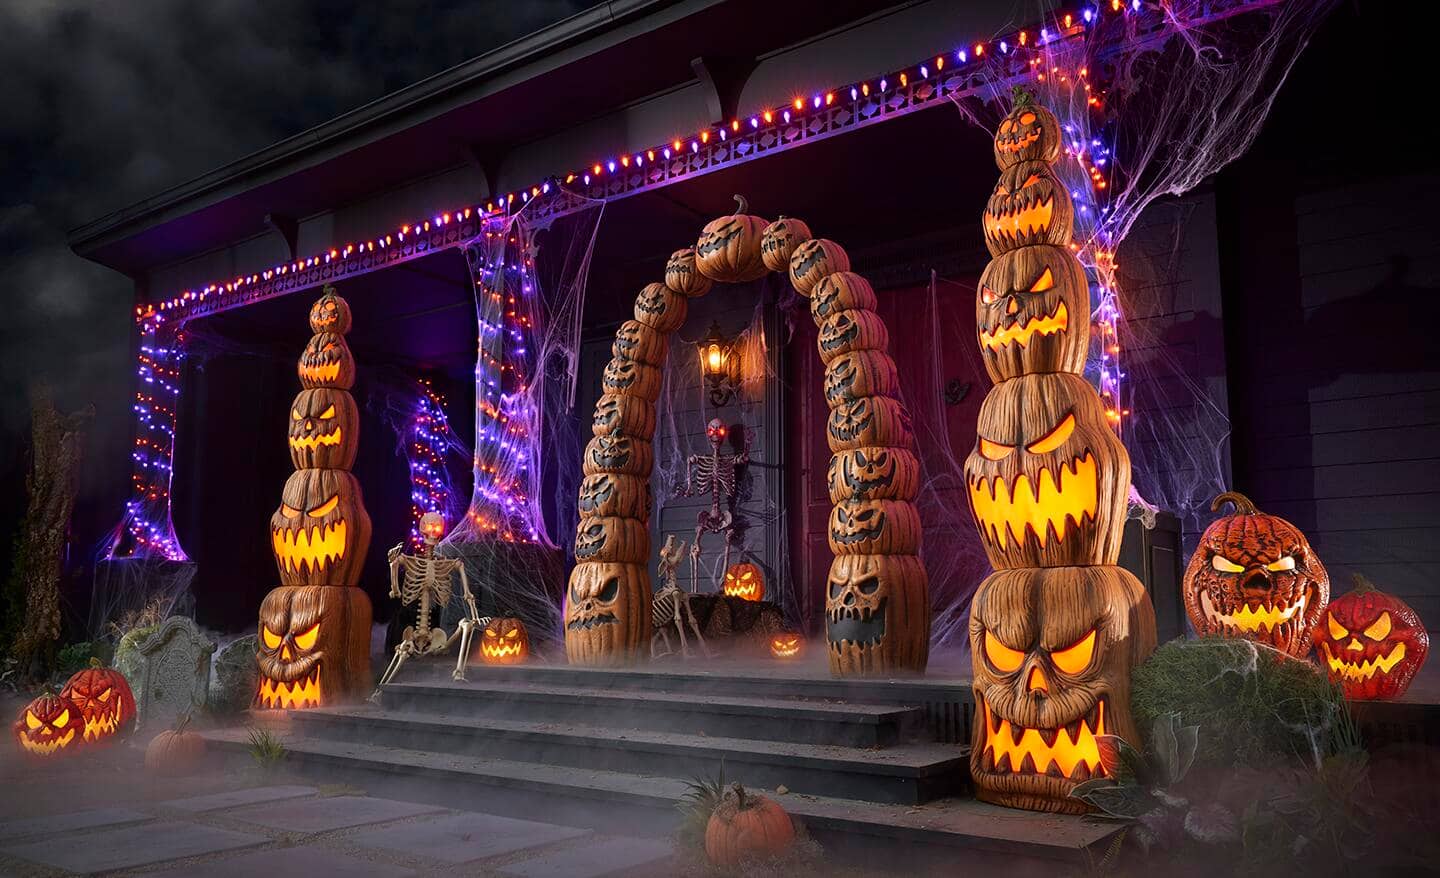 Strings of lights in orange and purple plus other lighted decor cover a house for Halloween.